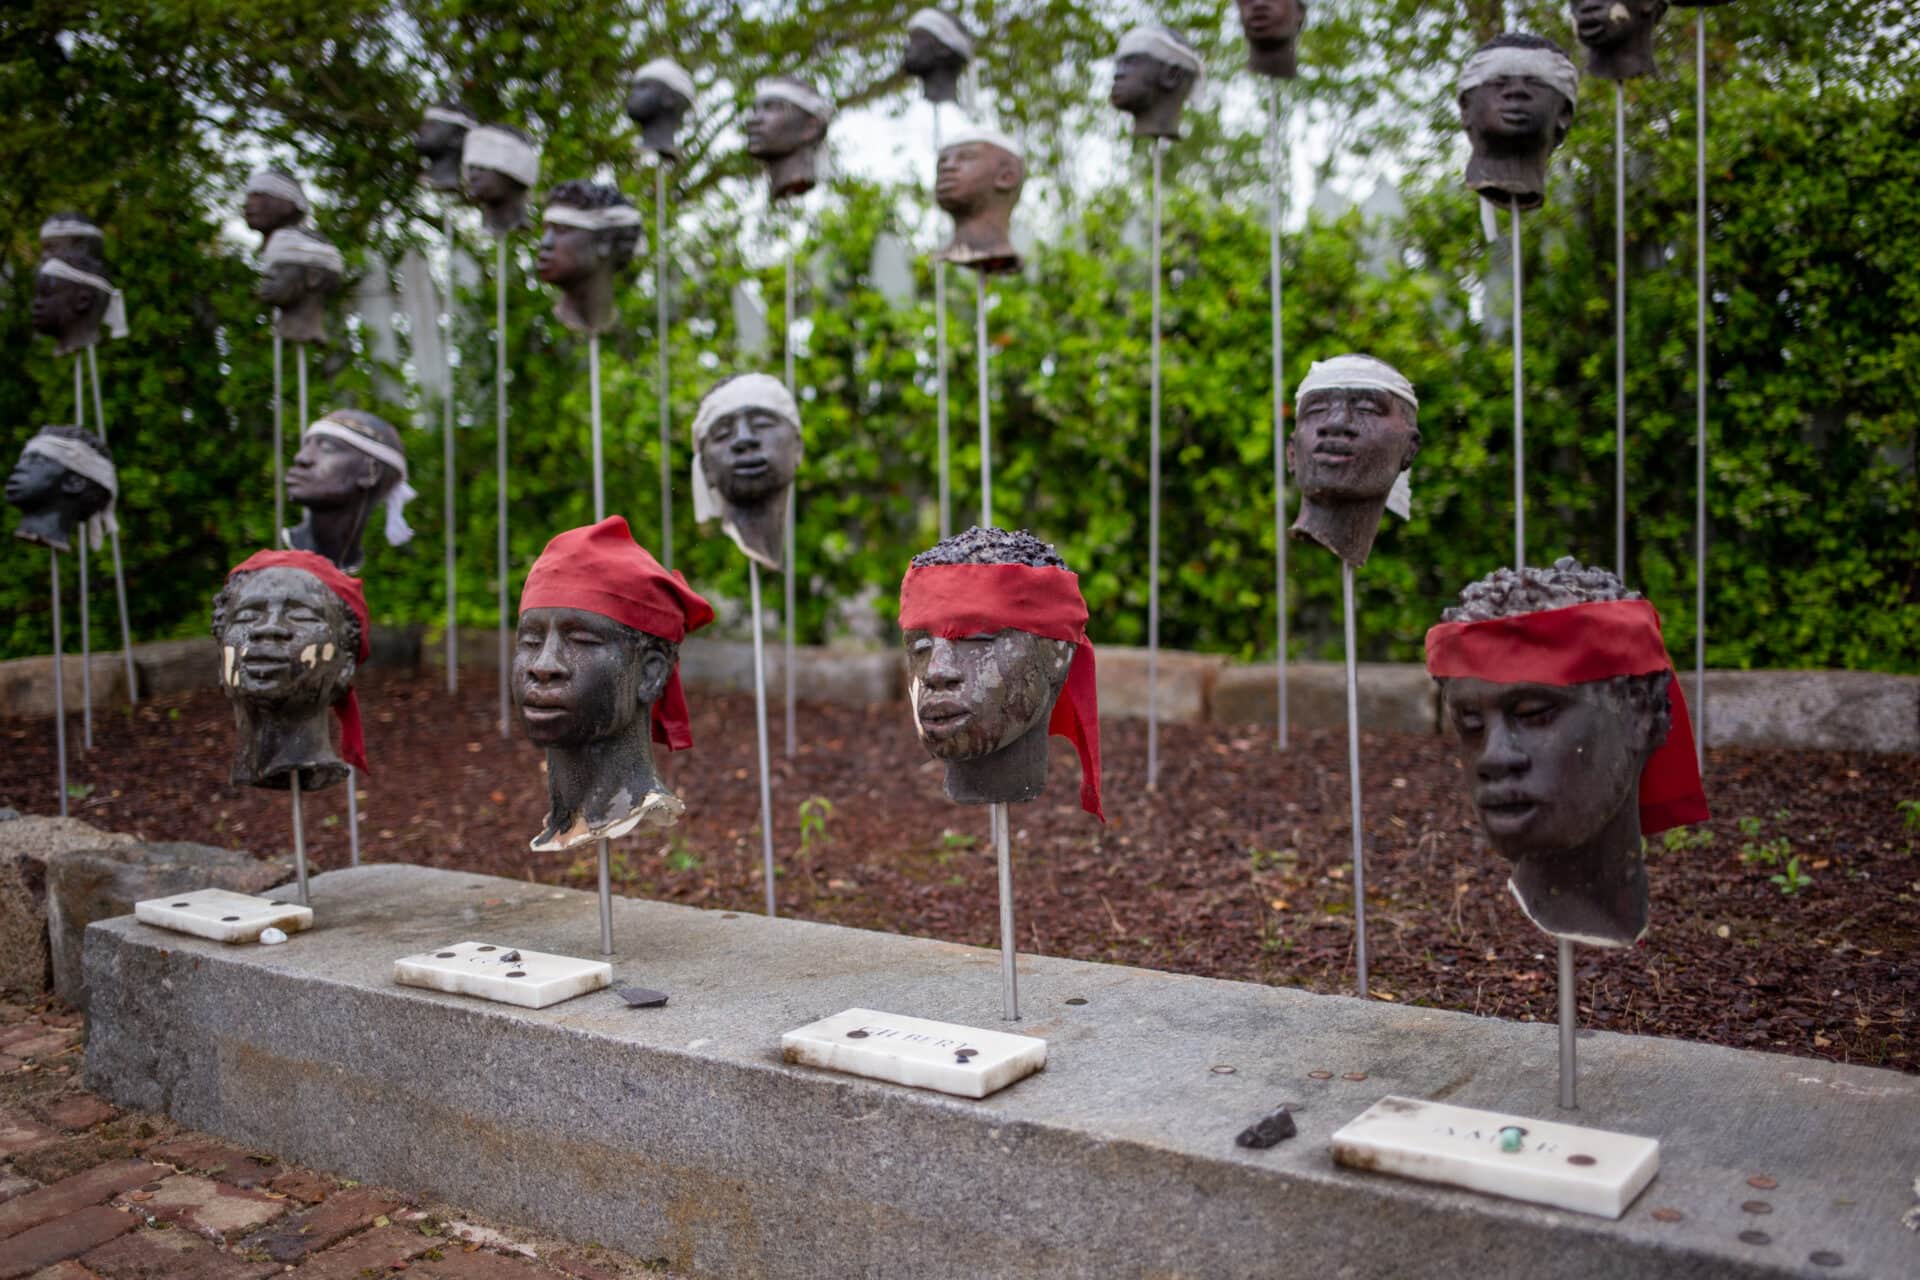 a sculpture depicting several severed heads on sticks, some of which wear red scarves tied around their foreheads, while others have white scarves